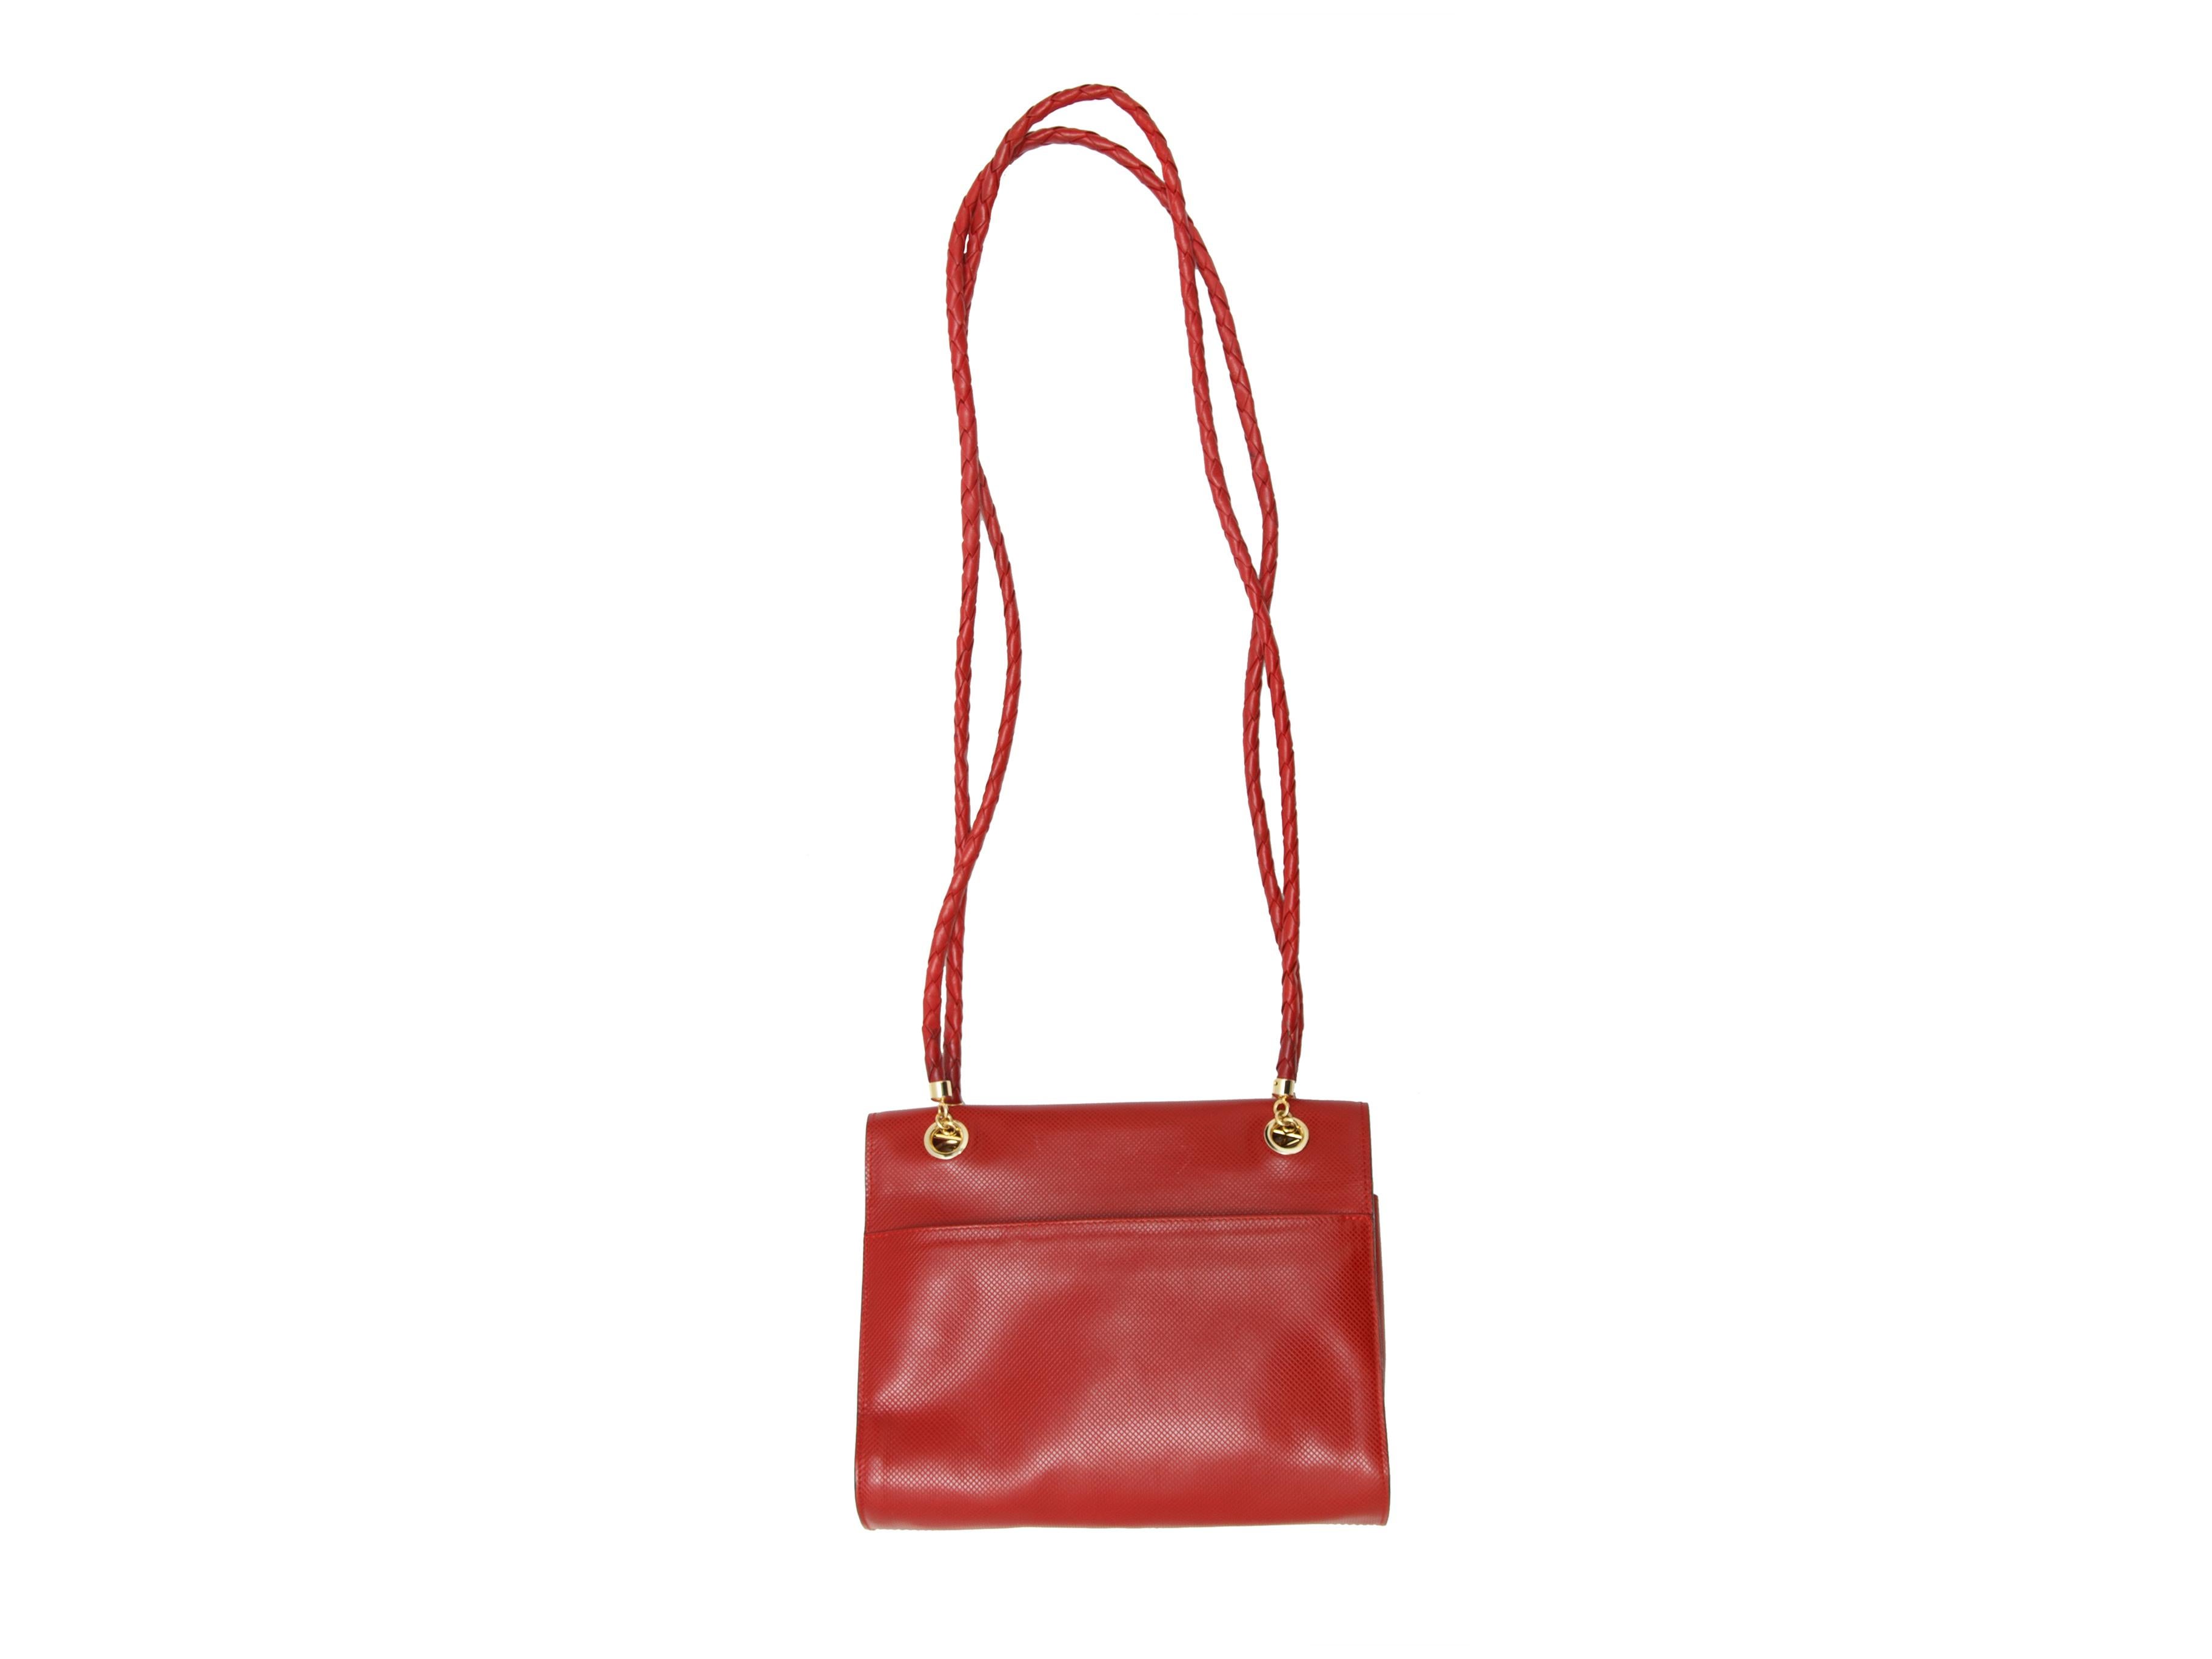 Product details: Red leather Marco Polo bag by Bottega Veneta. Gold-tone hardware. Detachable intrecciato straps. Interior zip pocket. Open pocket at back. Turn-lock closure at front. 9.5